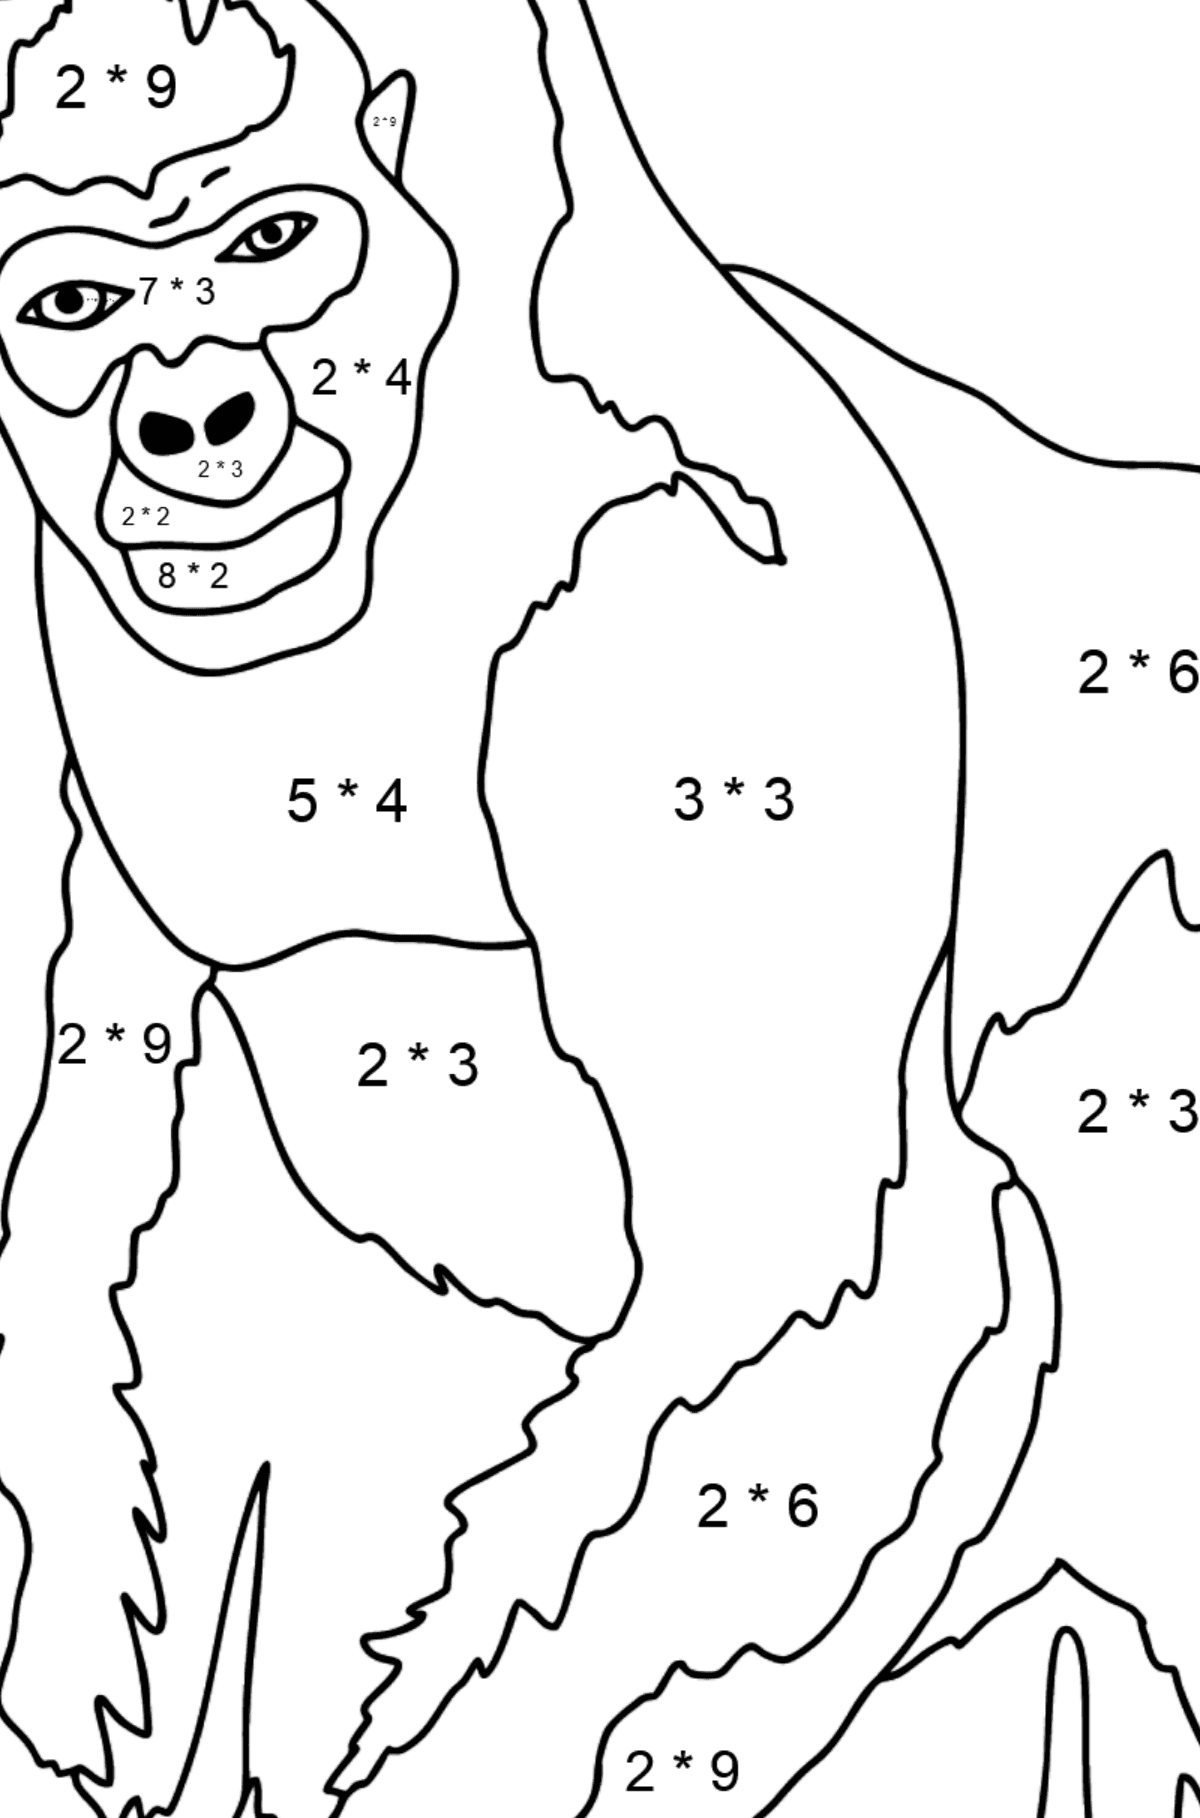 Coloring Page - A Hairy Gorilla - Math Coloring - Multiplication for Kids